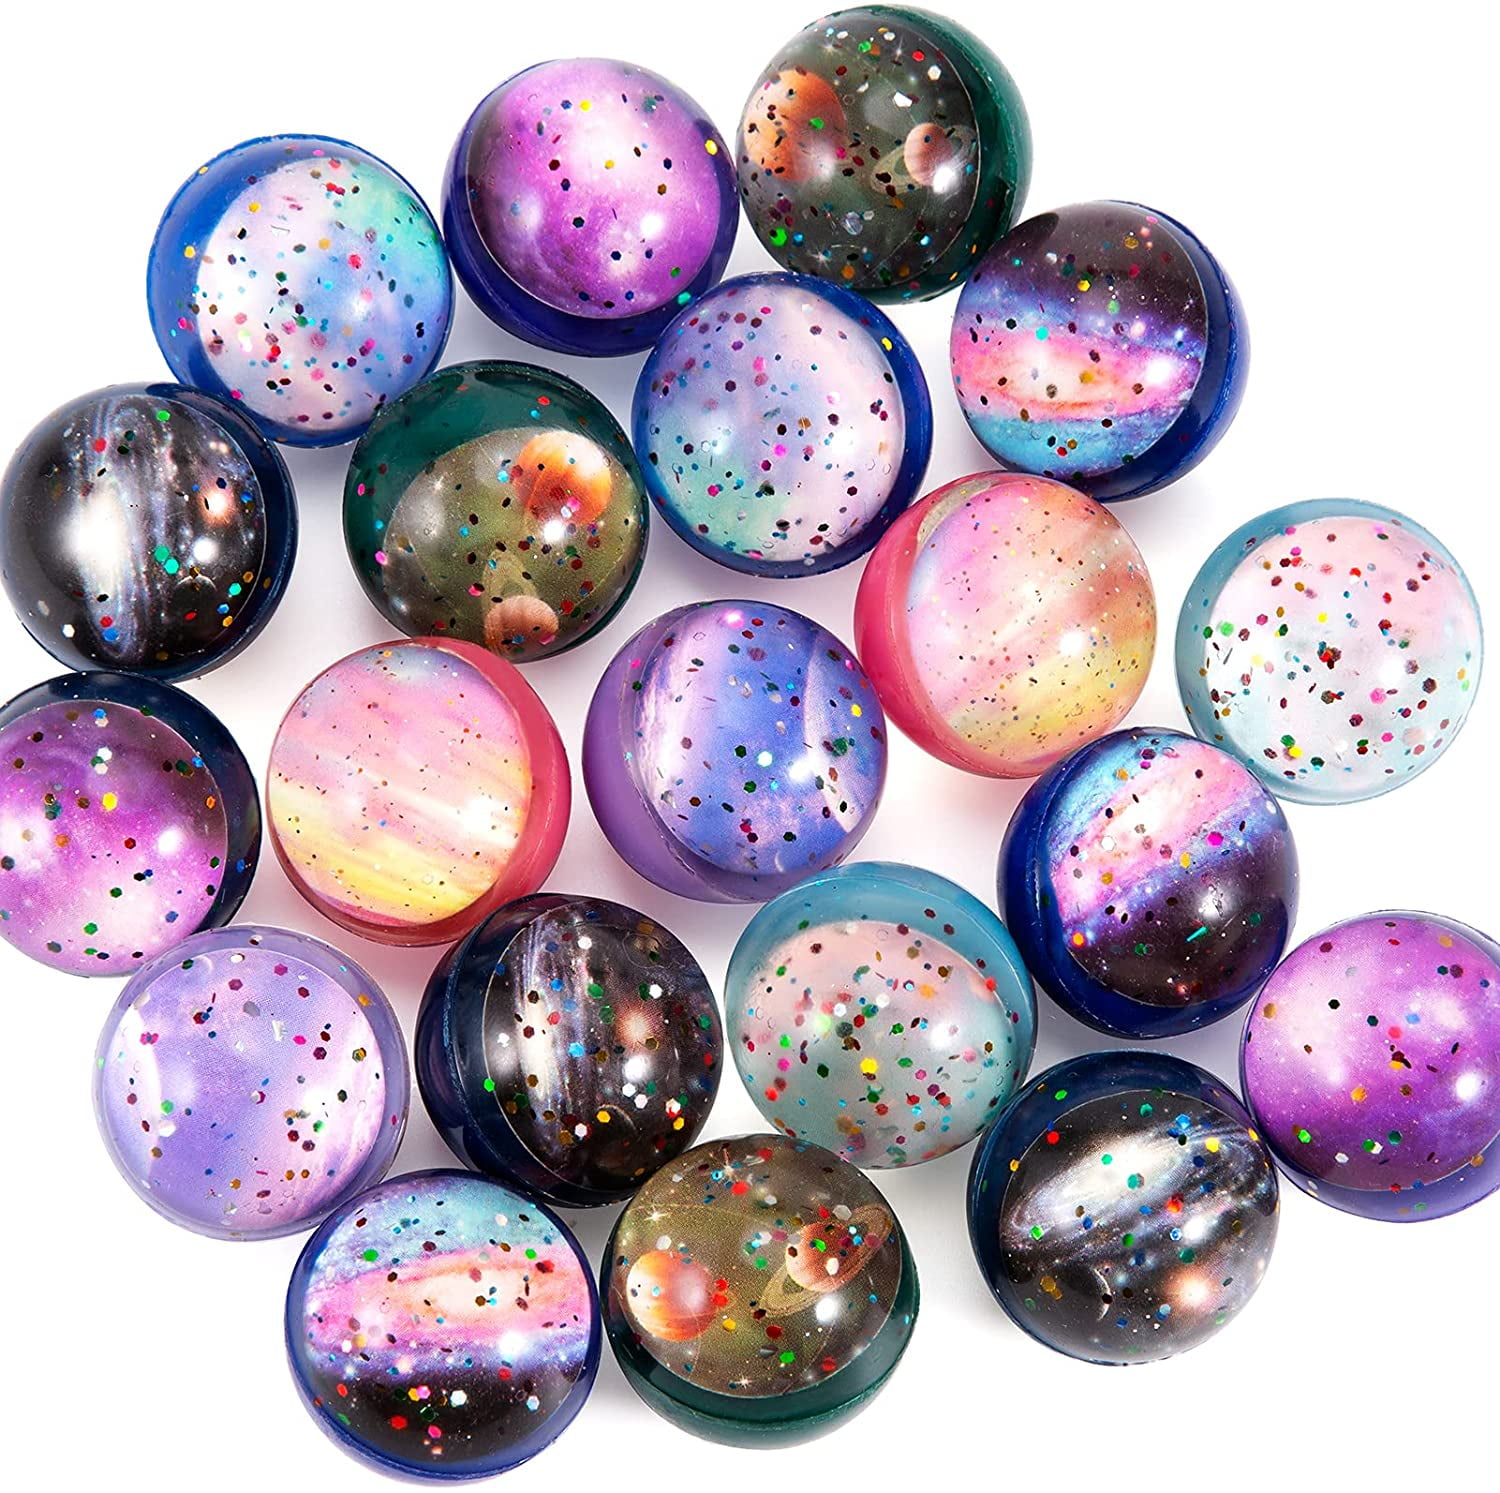 Pllieay 20PCS Bouncy Balls, 32mm Space Theme Bouncy Balls for Kids ...